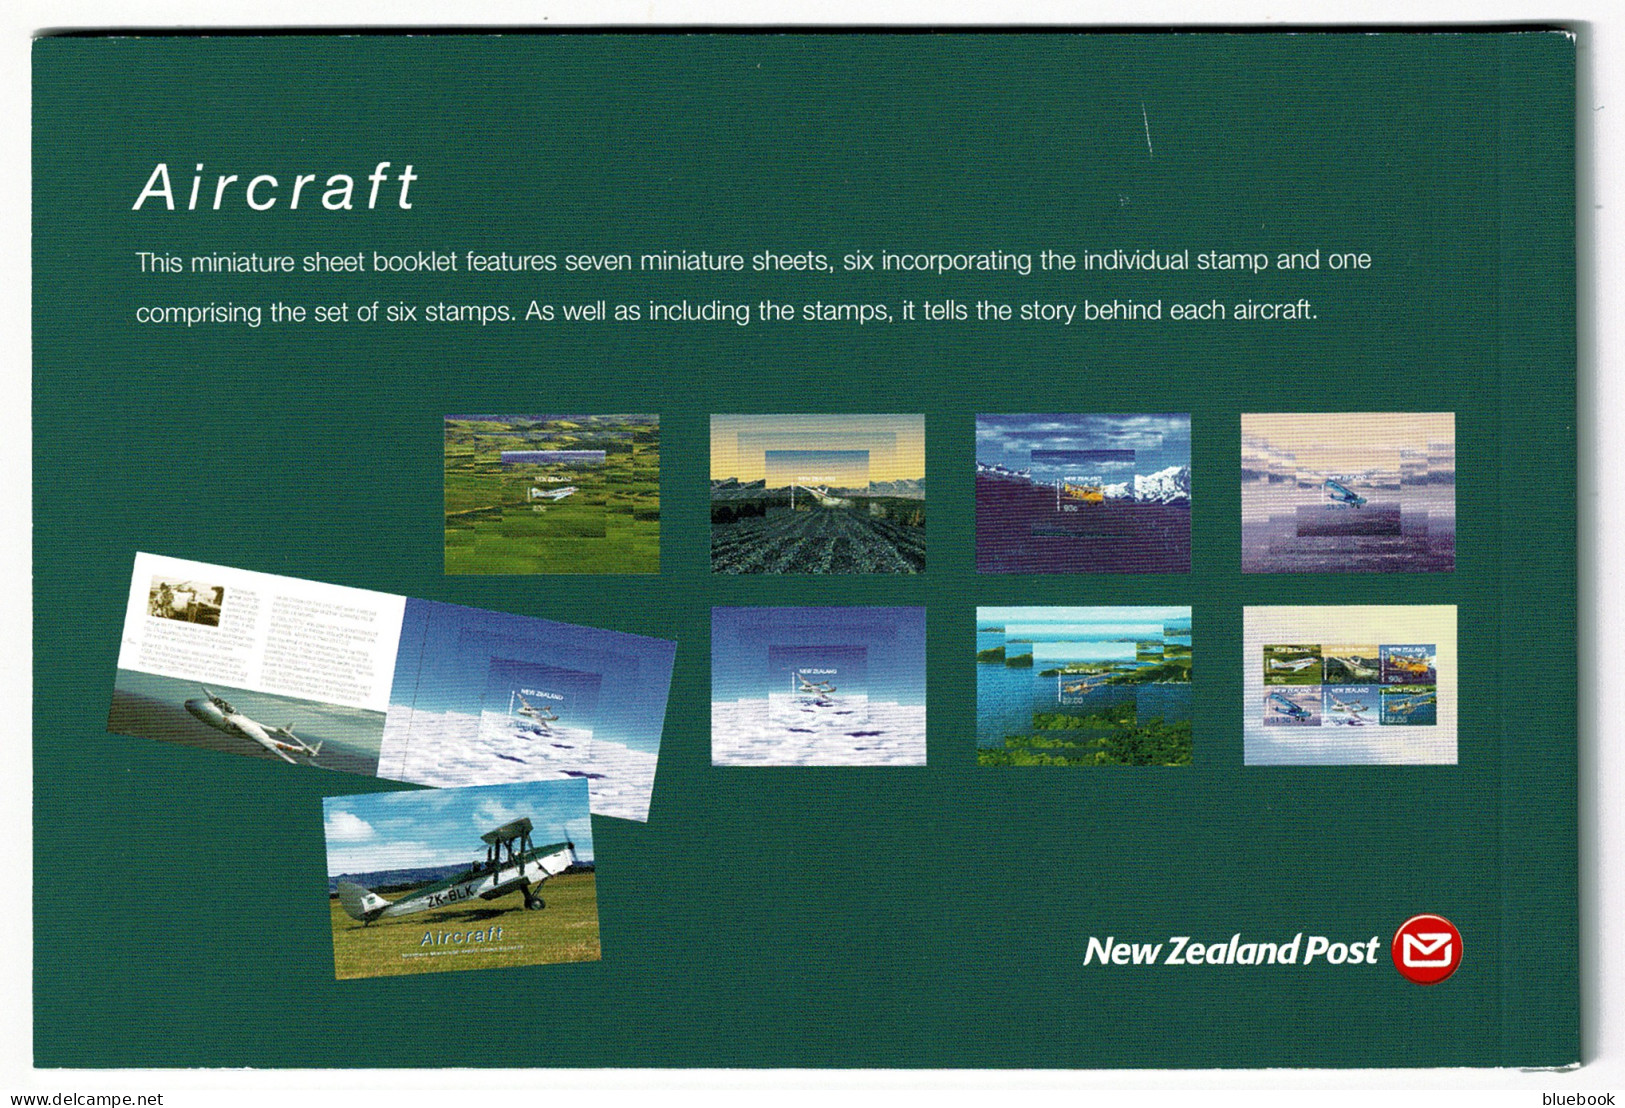 Ref 1602 - New Zealand Aviation Stamp Booklet - Aircraft With 7 Miniature Sheets - Libretti